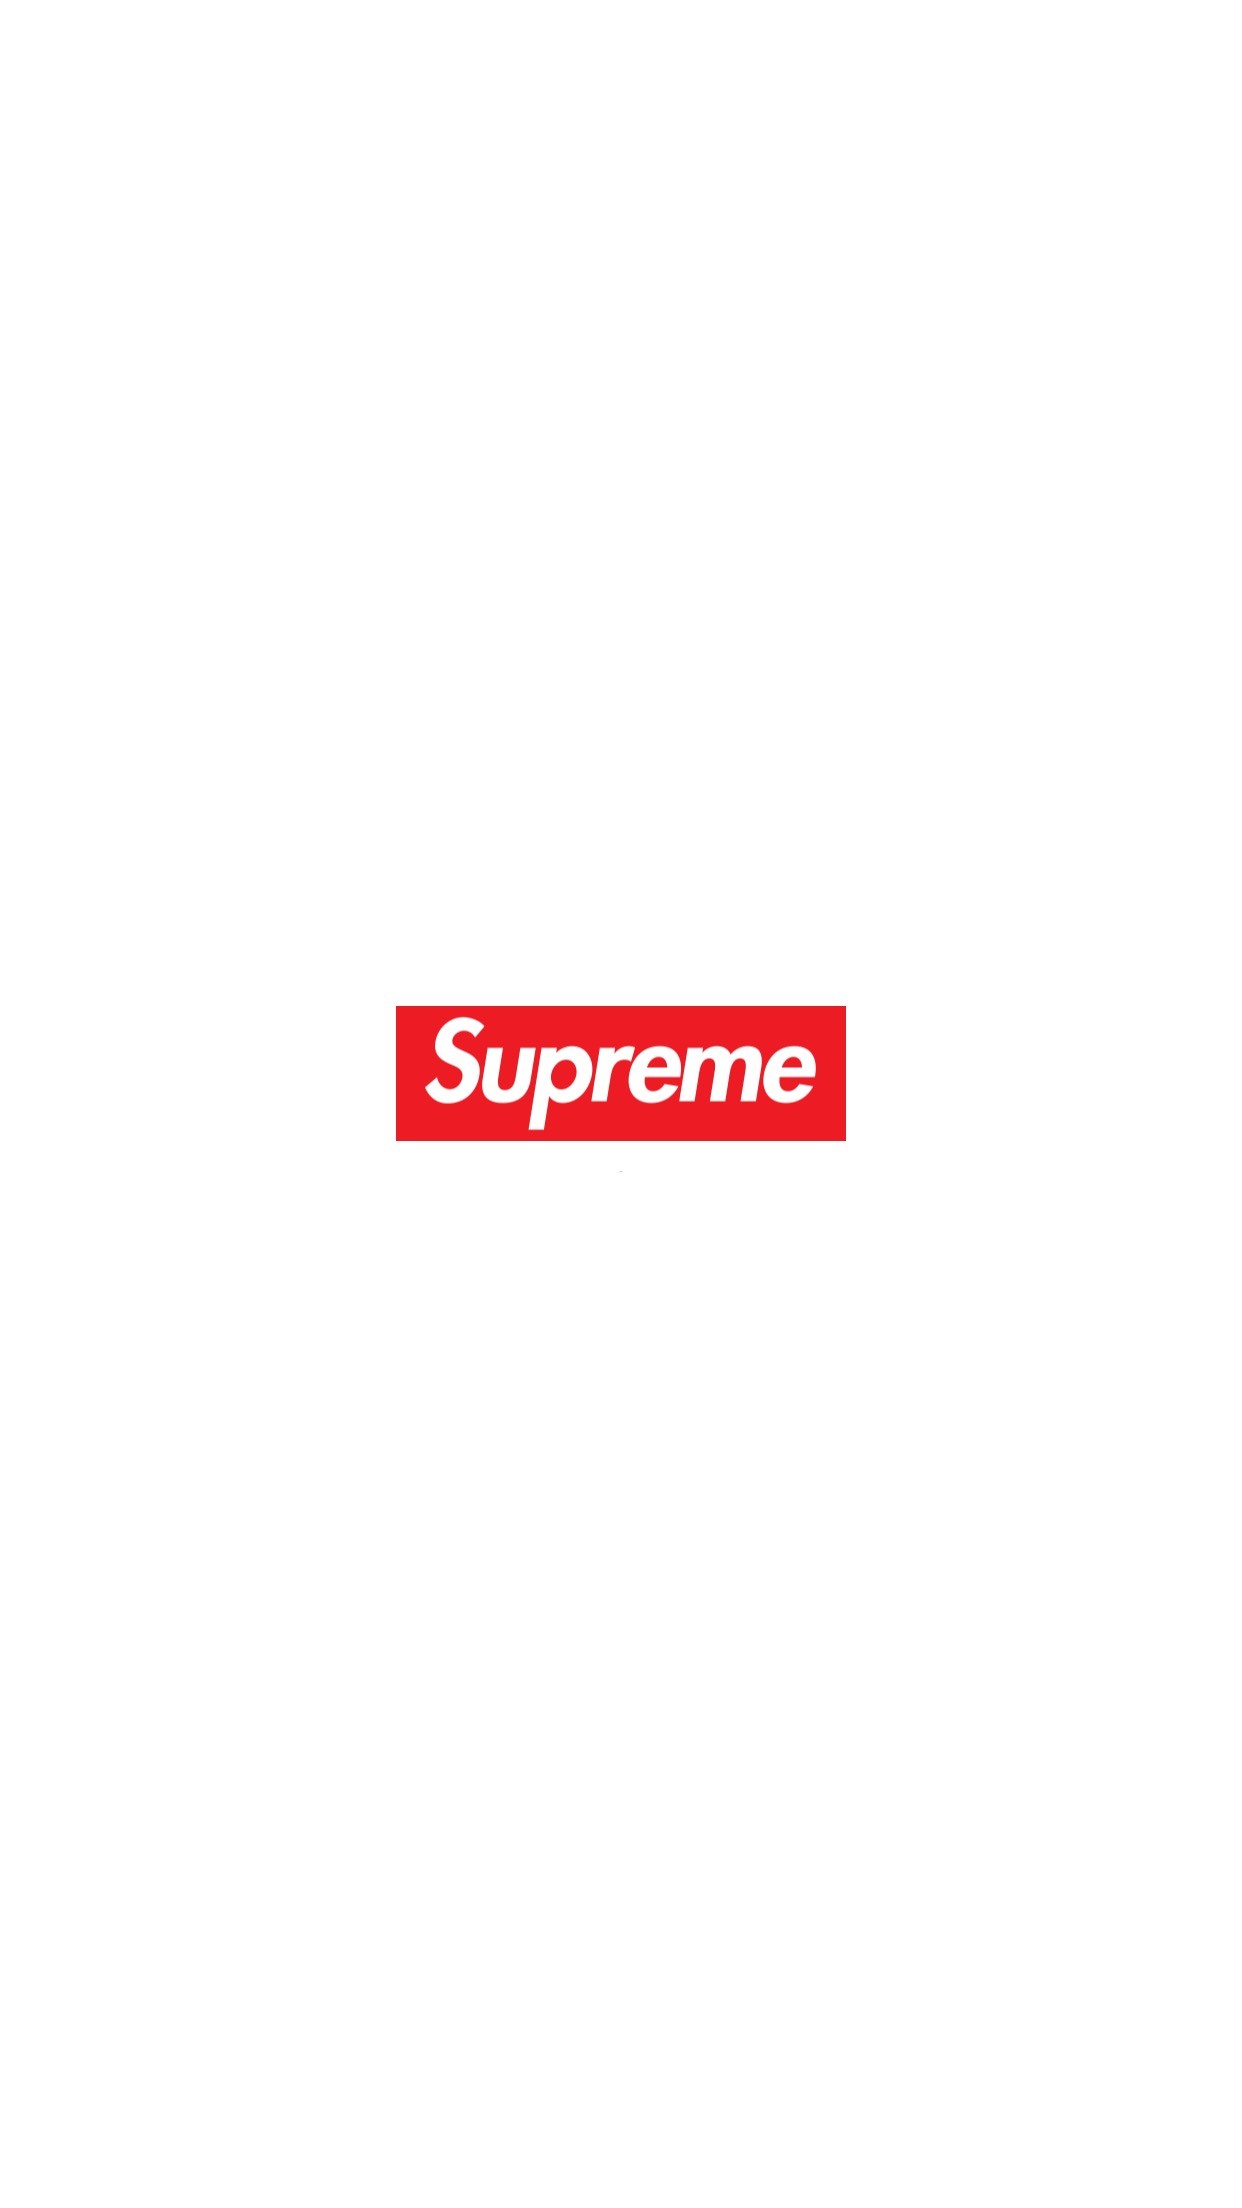 Supreme background ·① Download free backgrounds for desktop and mobile devices in any resolution 